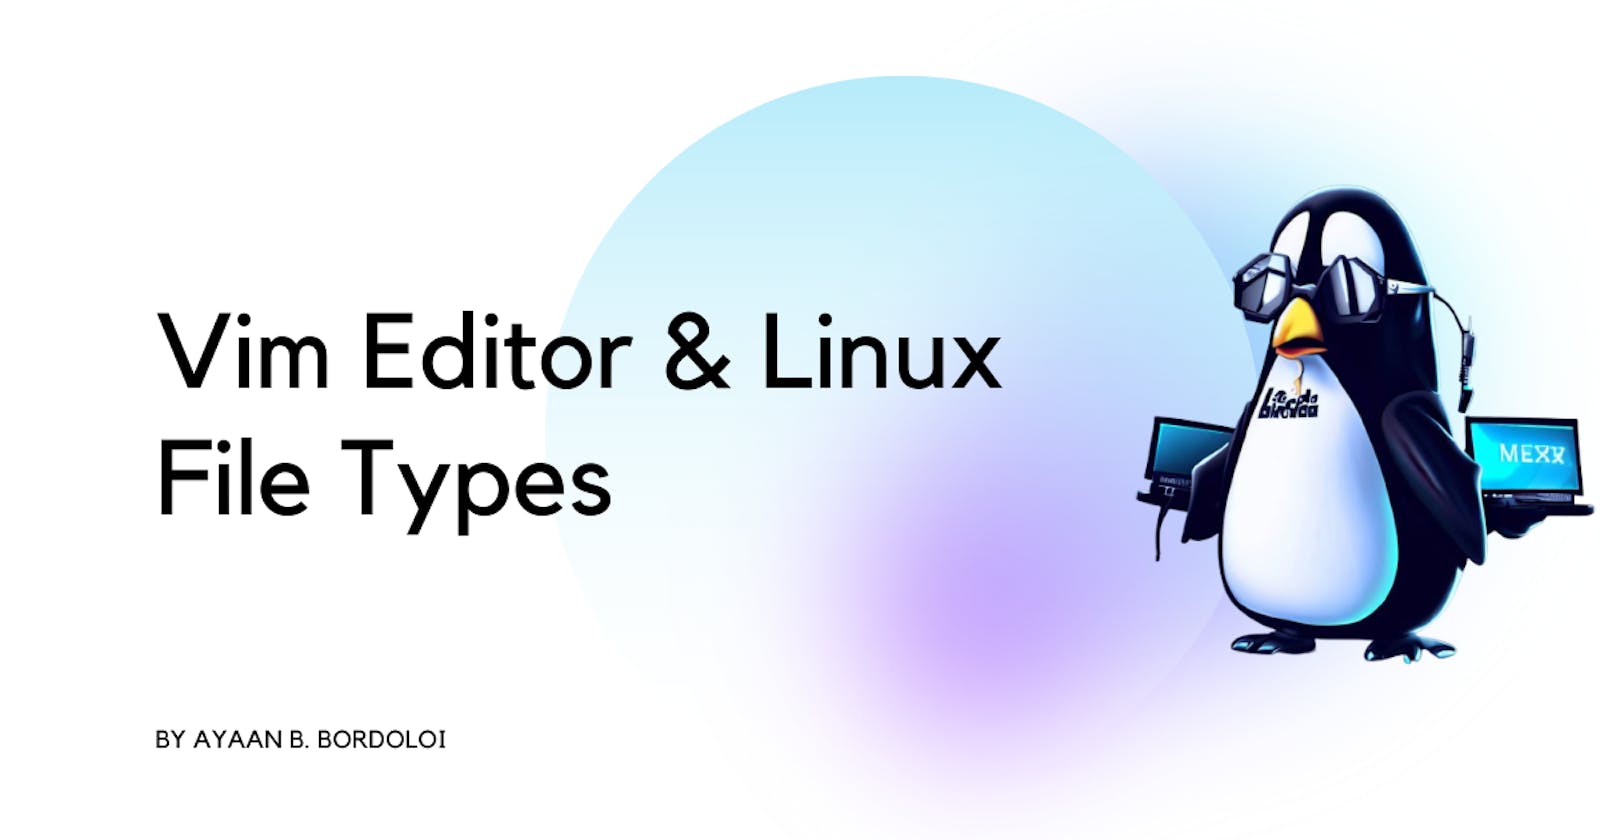 Mastering DevOps: Editing Files with VIM in Linux and Understanding the Linux File Types